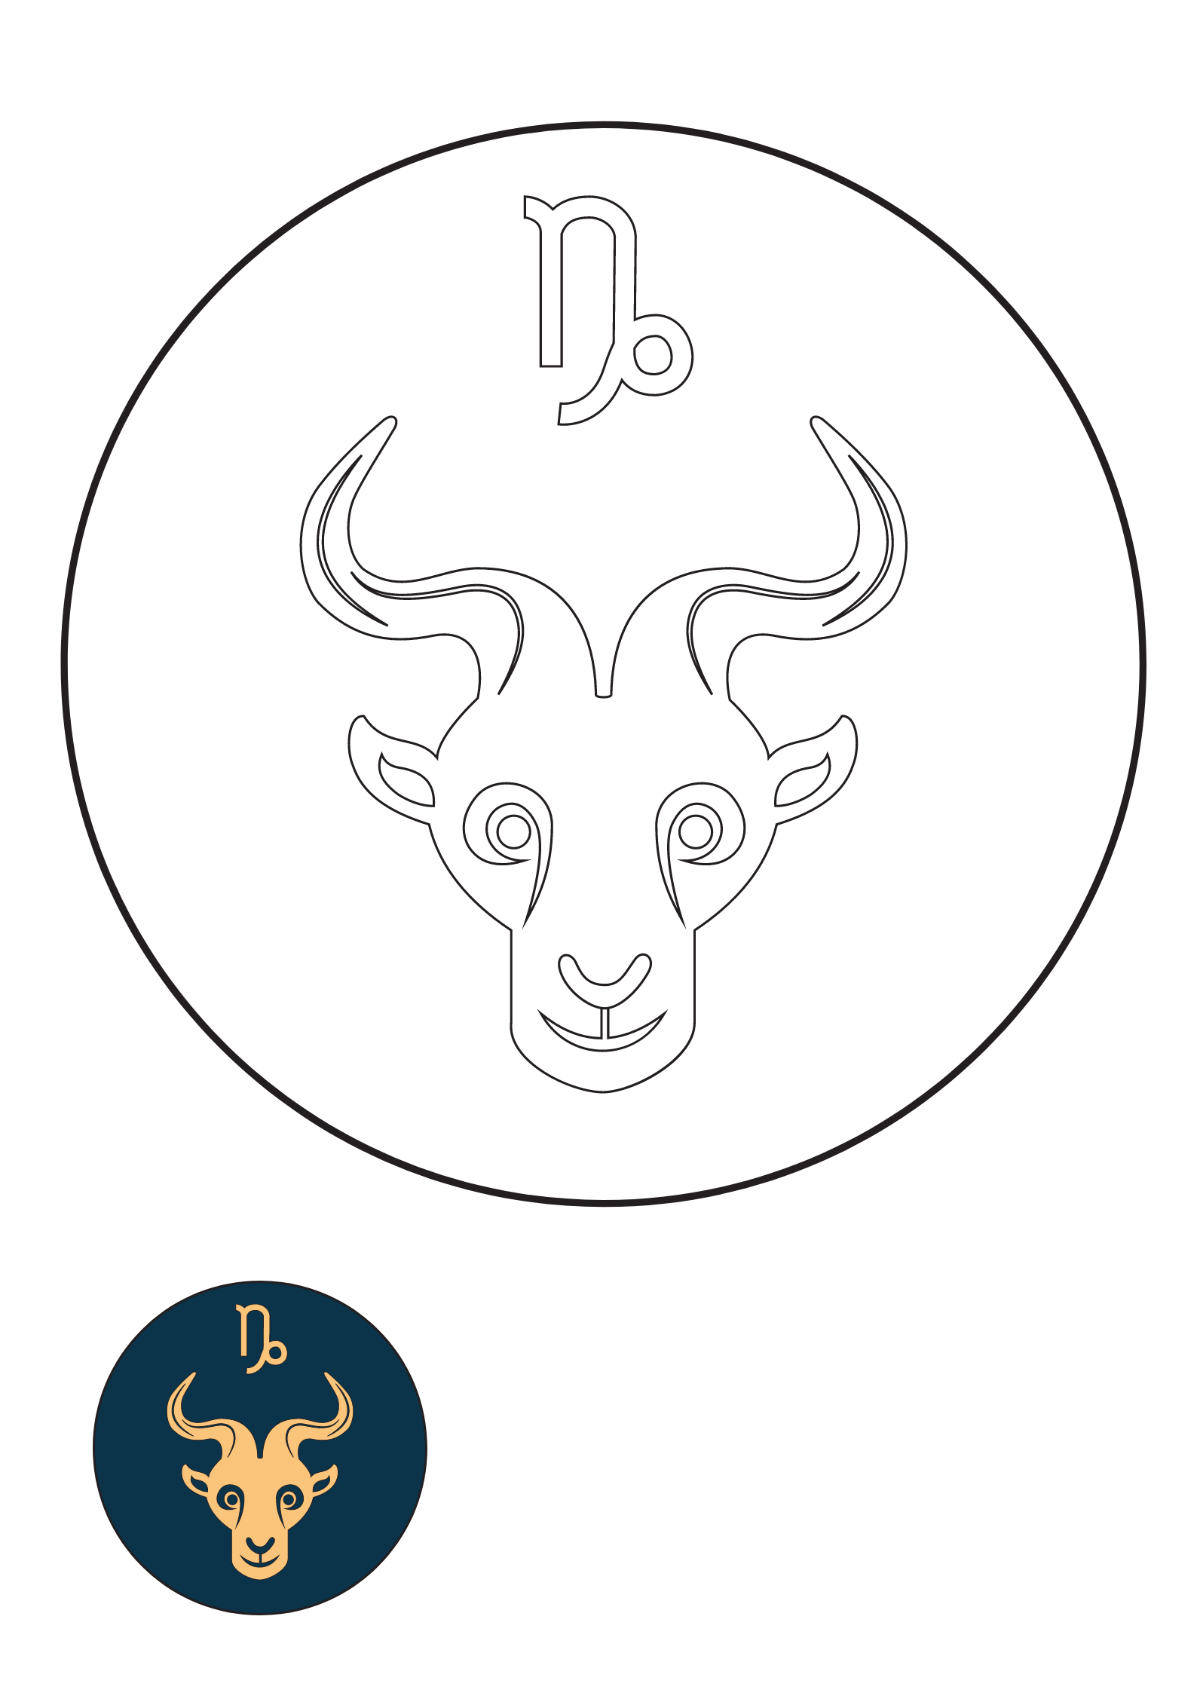 Capricorn Horoscope coloring page Template